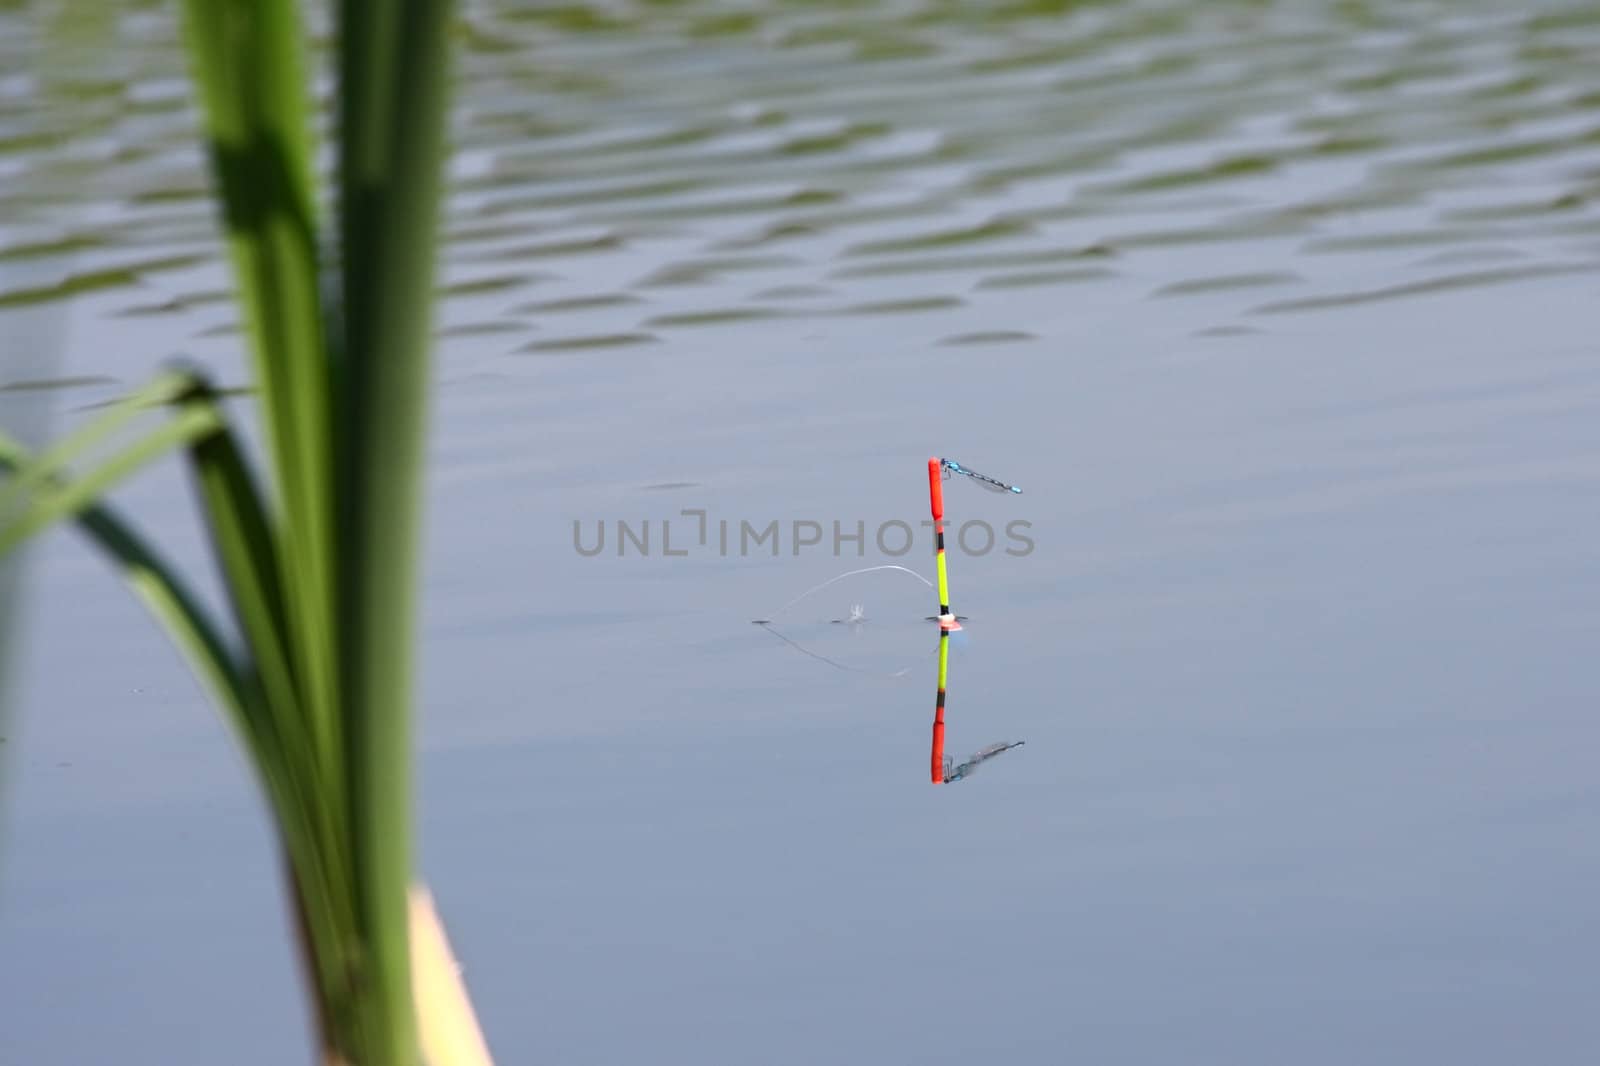 Fishing bobber and a dragonfly sitting on it

